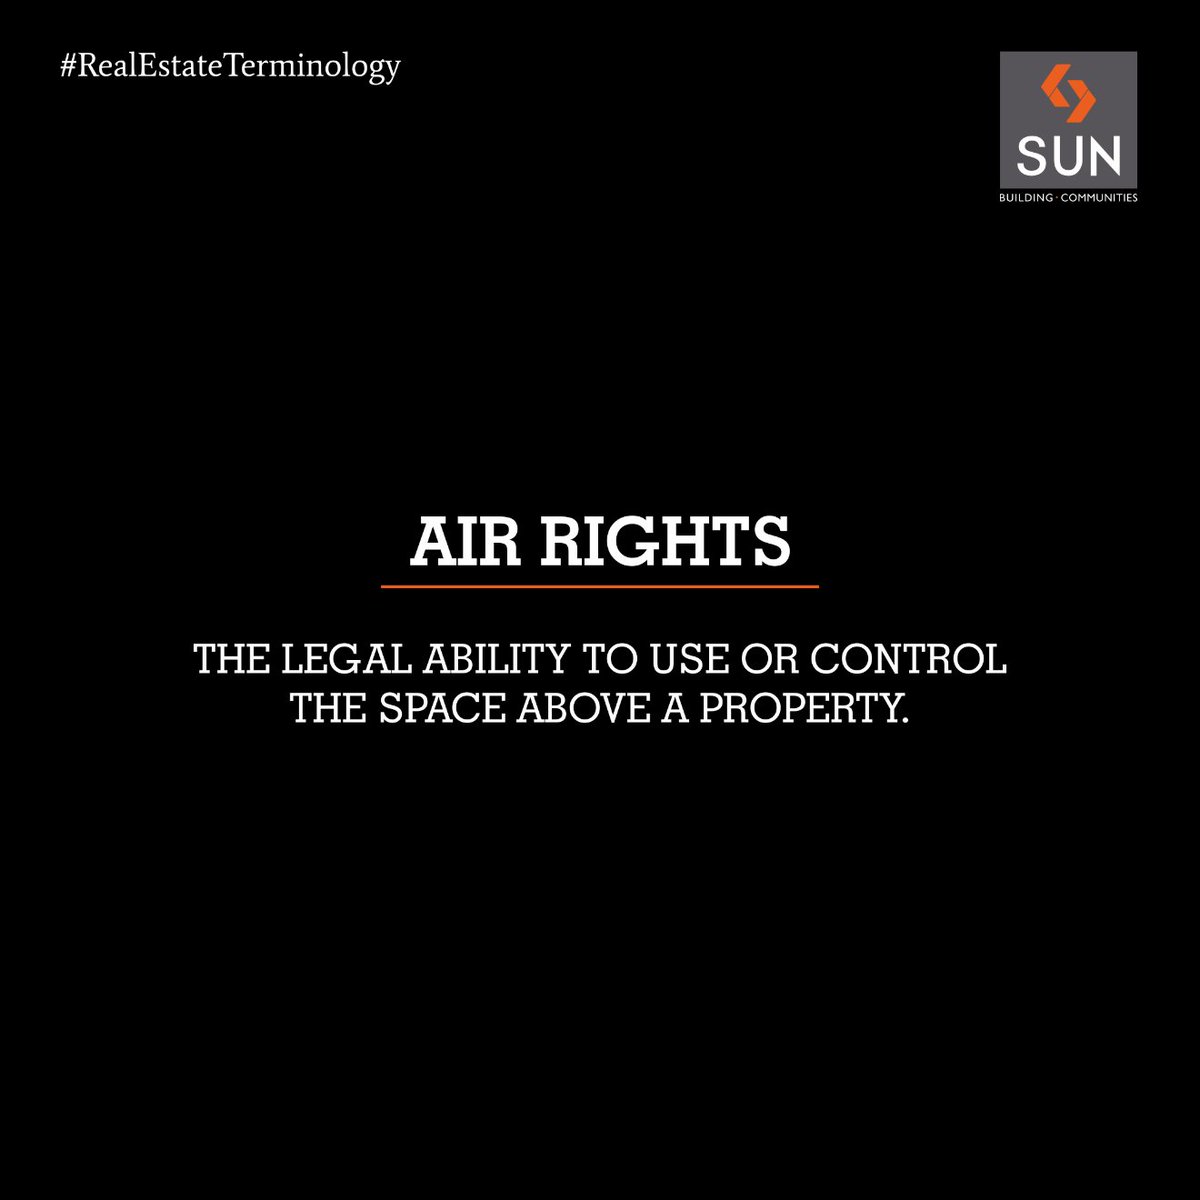 #RealEstateTerminology
Interesting fact about #airrights: It can be sold, leased or donated to another party. https://t.co/t1YON2BqSf